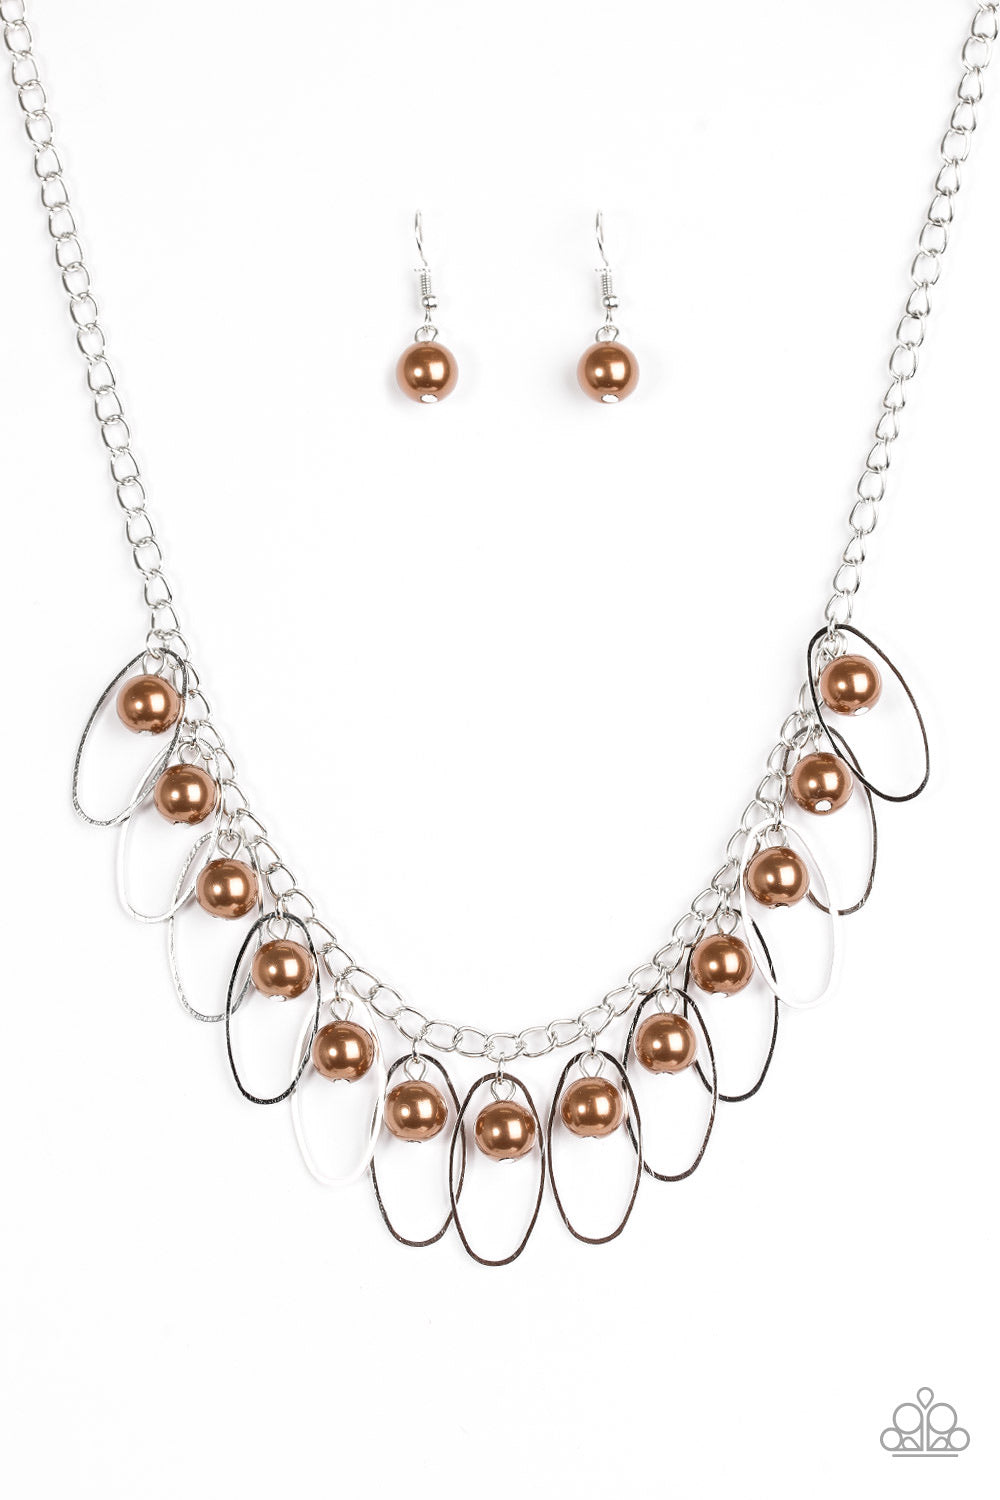 Paparazzi Accessories  - Party Princess #N508 Box 6 - Brown Necklace